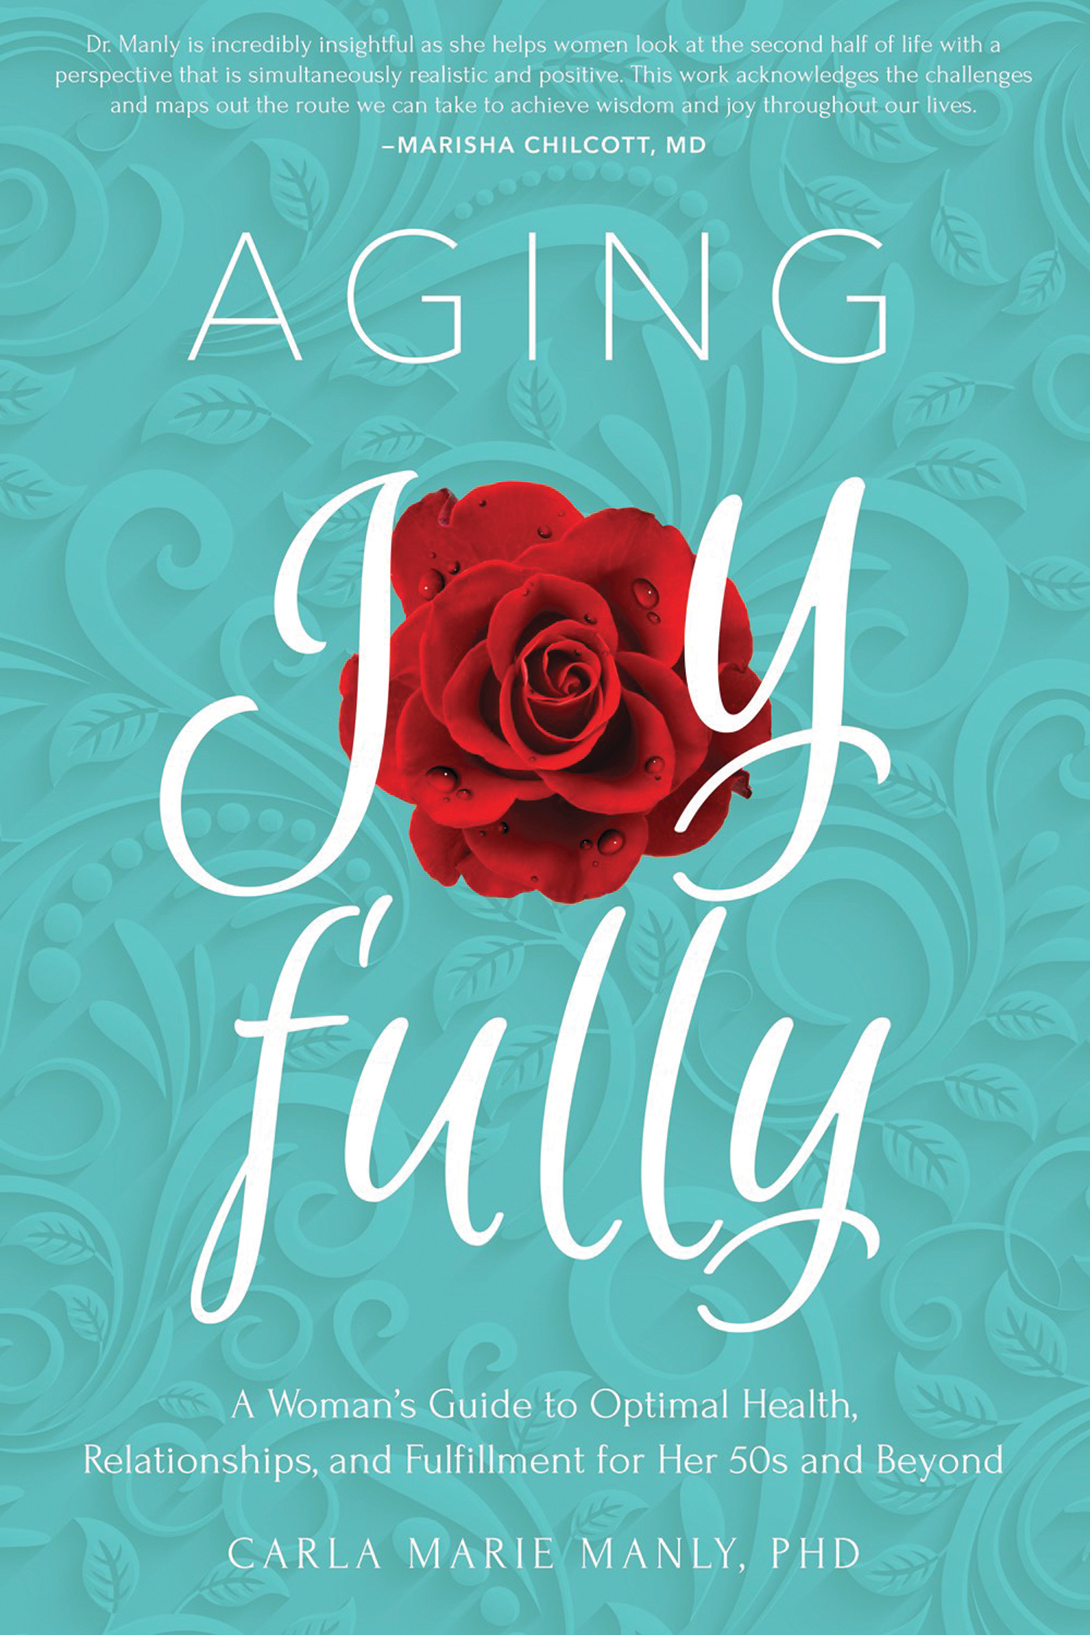 Aging Joyfully: A Woman’s Guide to Optimal Health, Relationships, and Fulfillment for Her 50s and Beyond by Carla Marie Manly, Familius, $